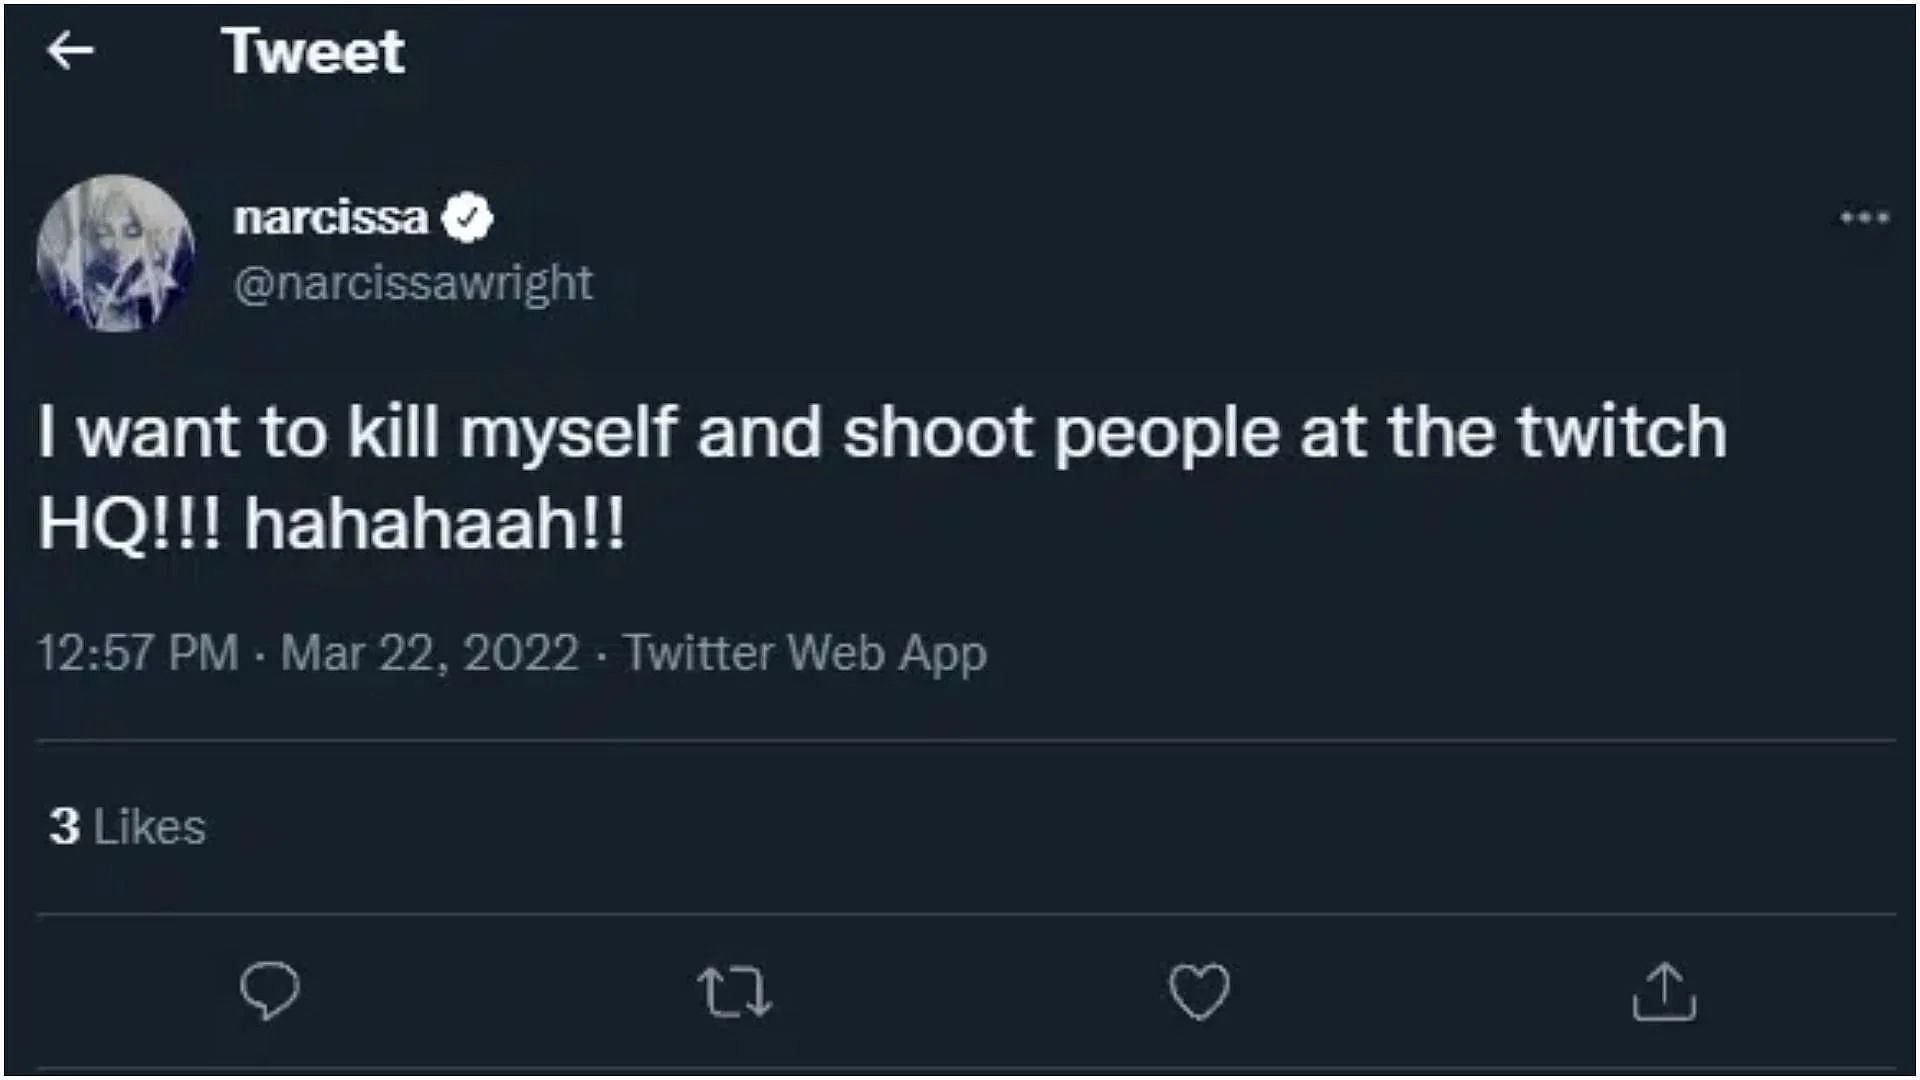 Twitch streamer threatens to shoot people at Twitch headquarters (Image via narcissawright/Twitter)